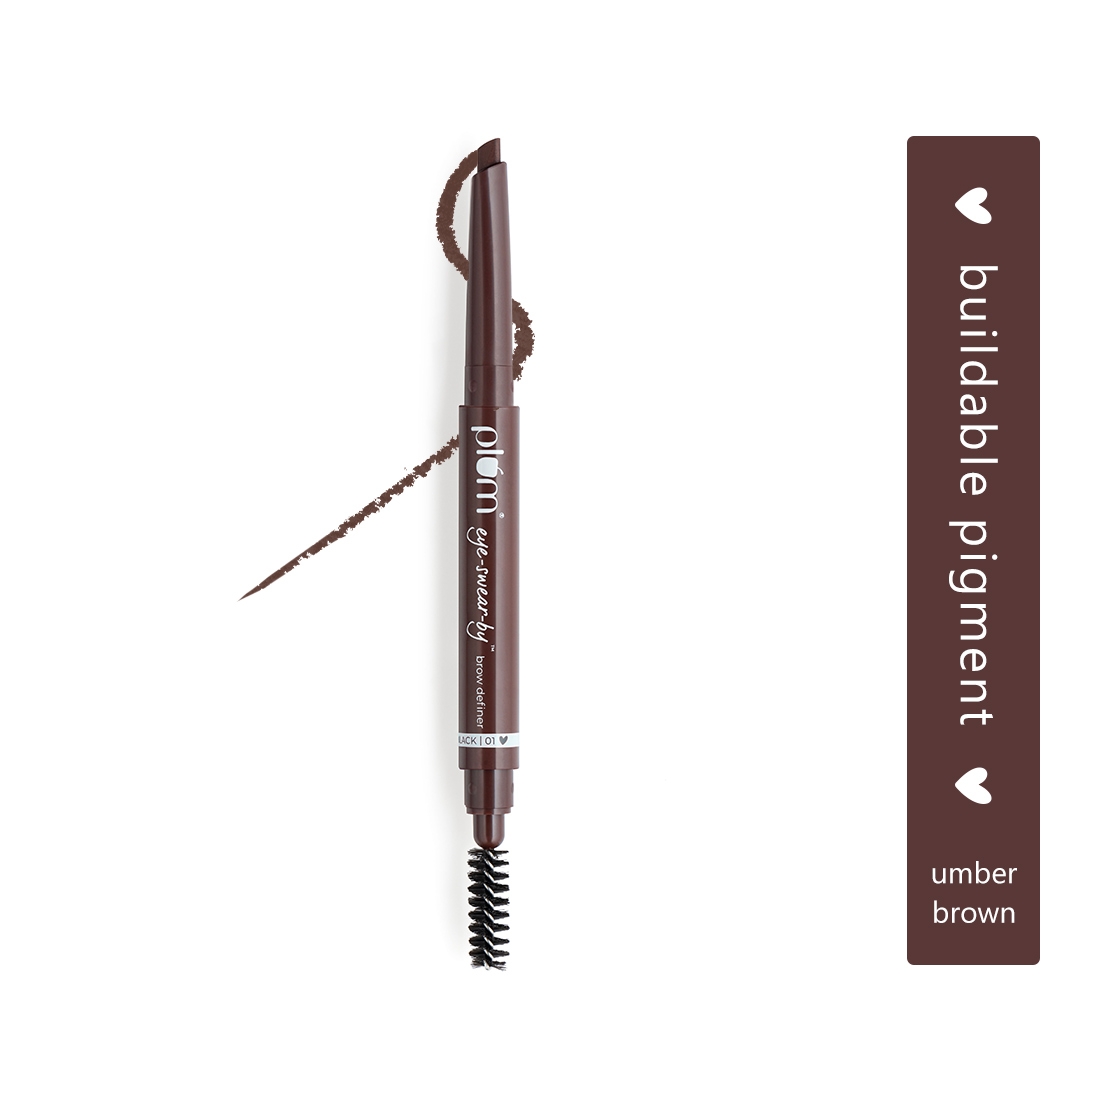 plum be good | Plum Eye-Swear-By Brow Definer - Umber Brown | Buildable Pigment | With Vitamin E | 100% Vegan & Cruelty Free 0